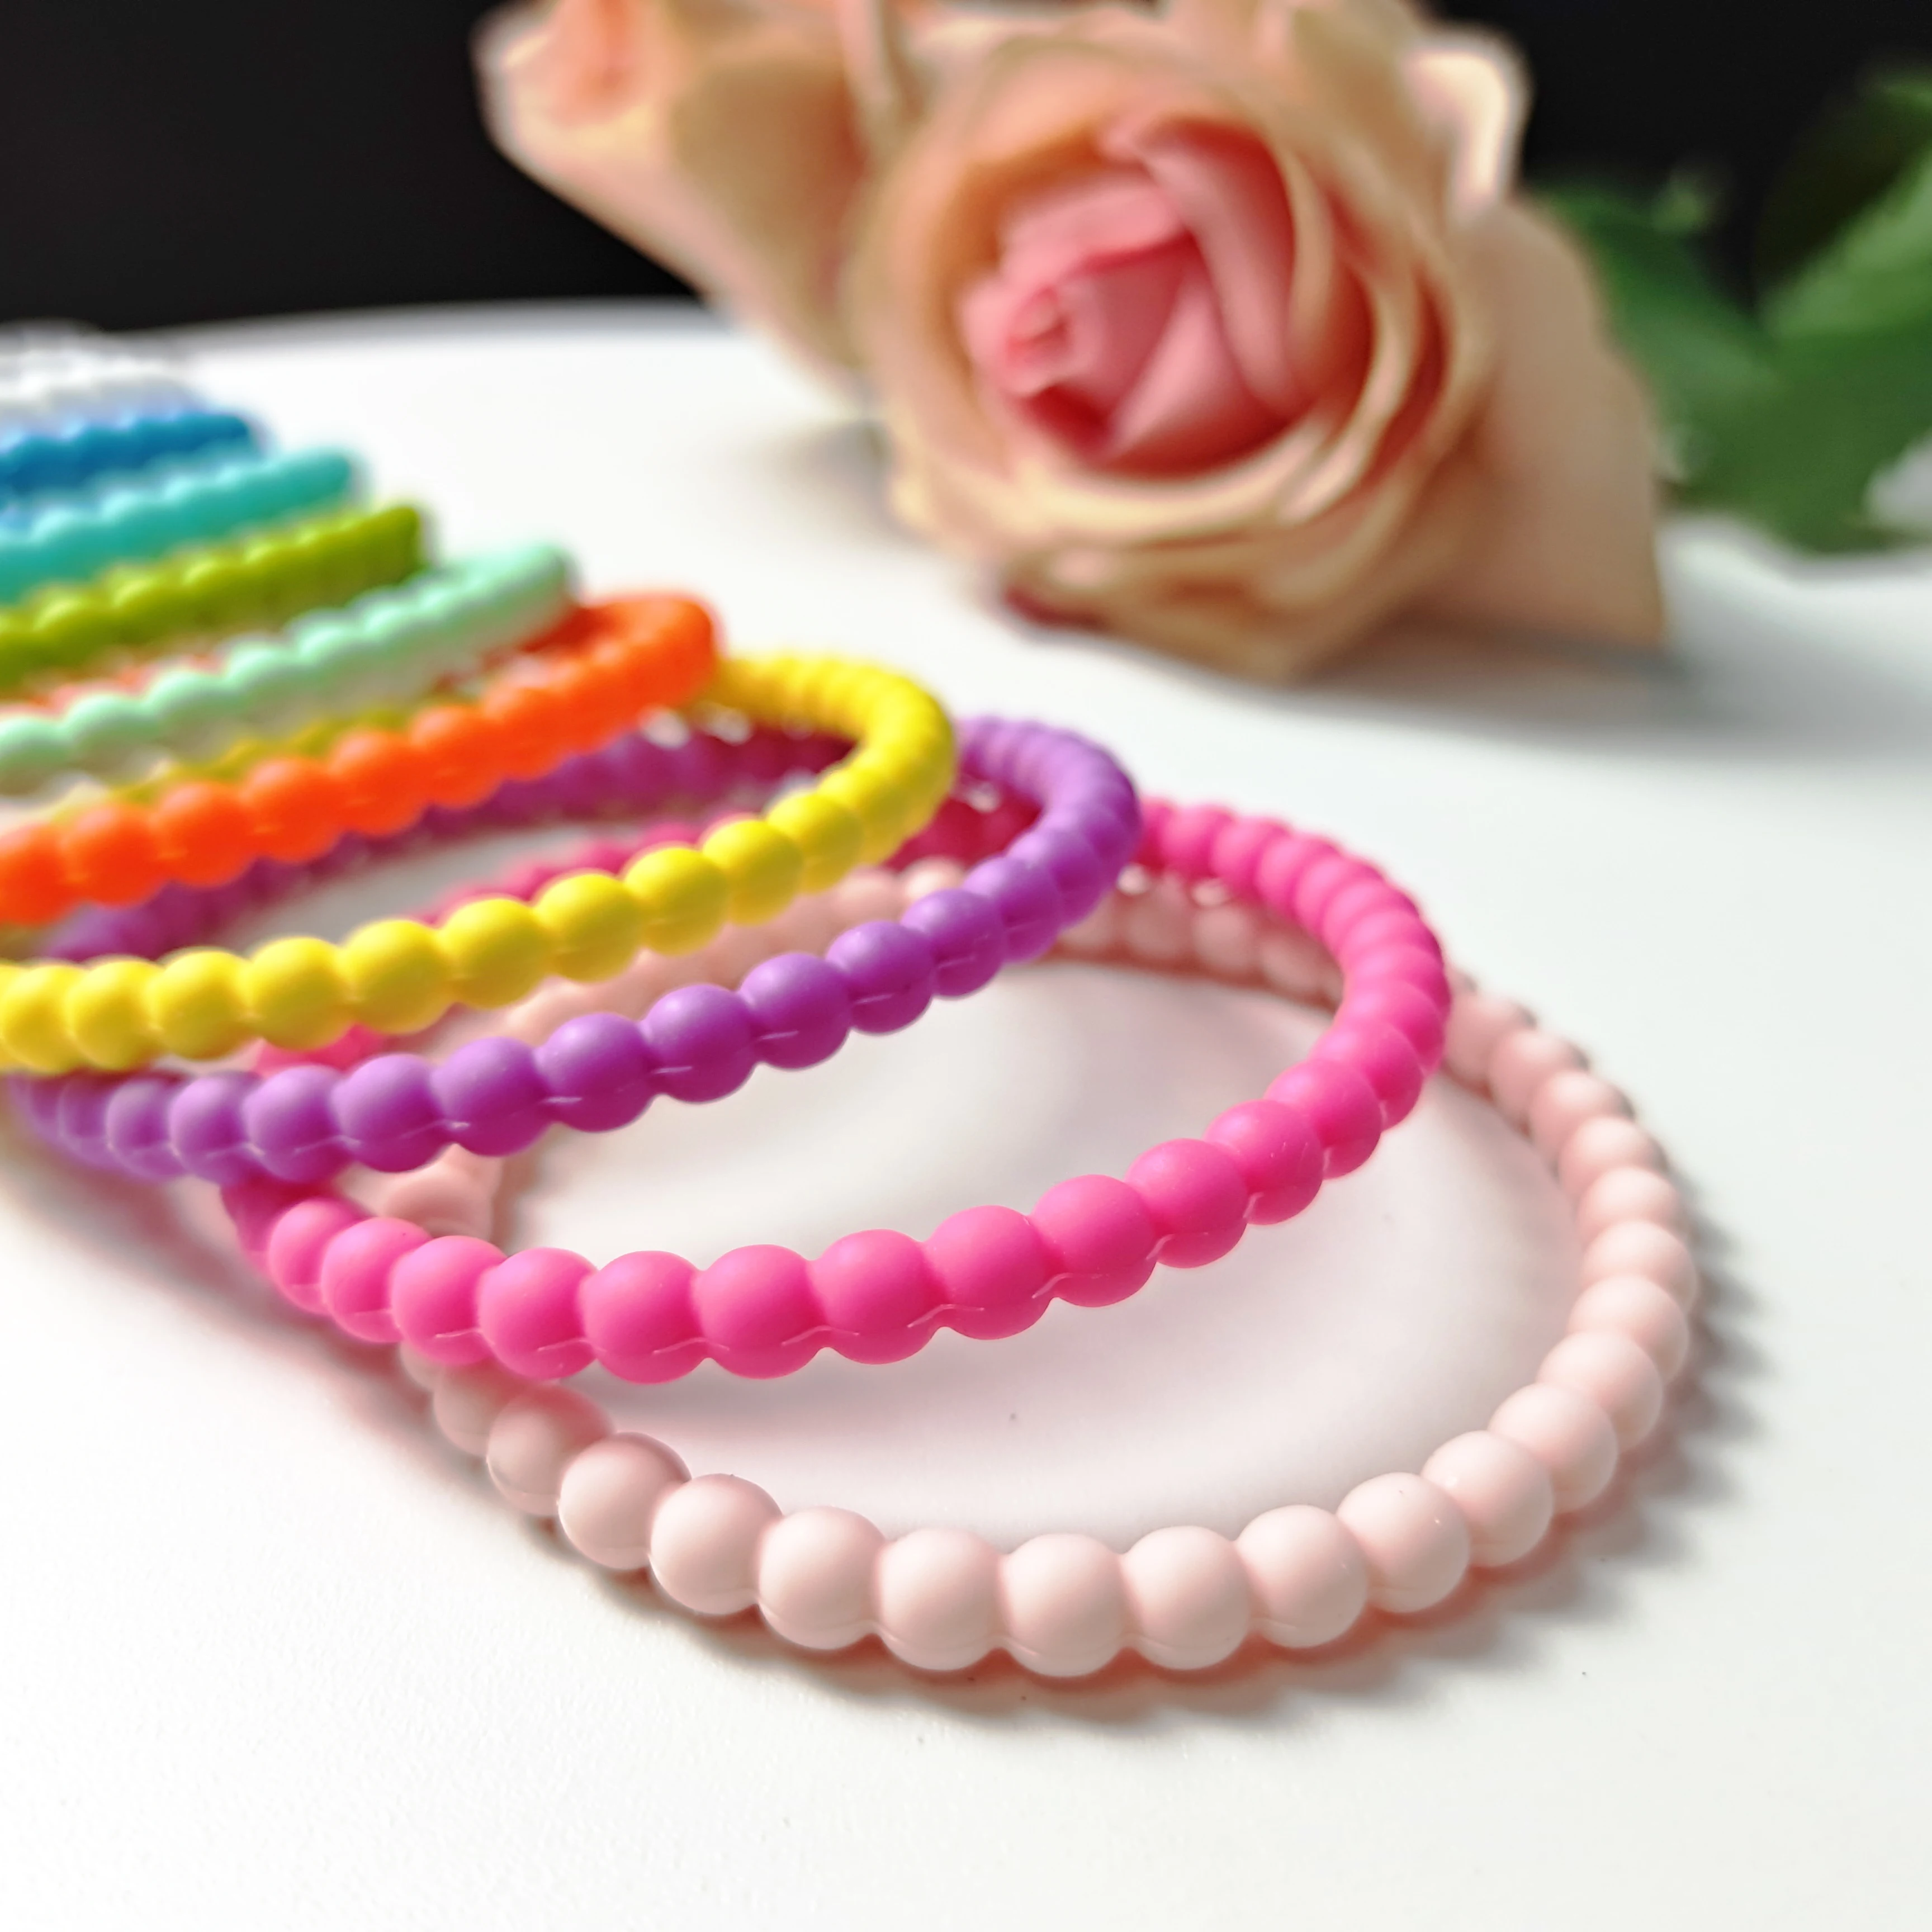 

2021 Hot Sell Perfume Stackable Bead Bracelet for Women Girls Stretch Silicone Bead Bangle, Picture shows